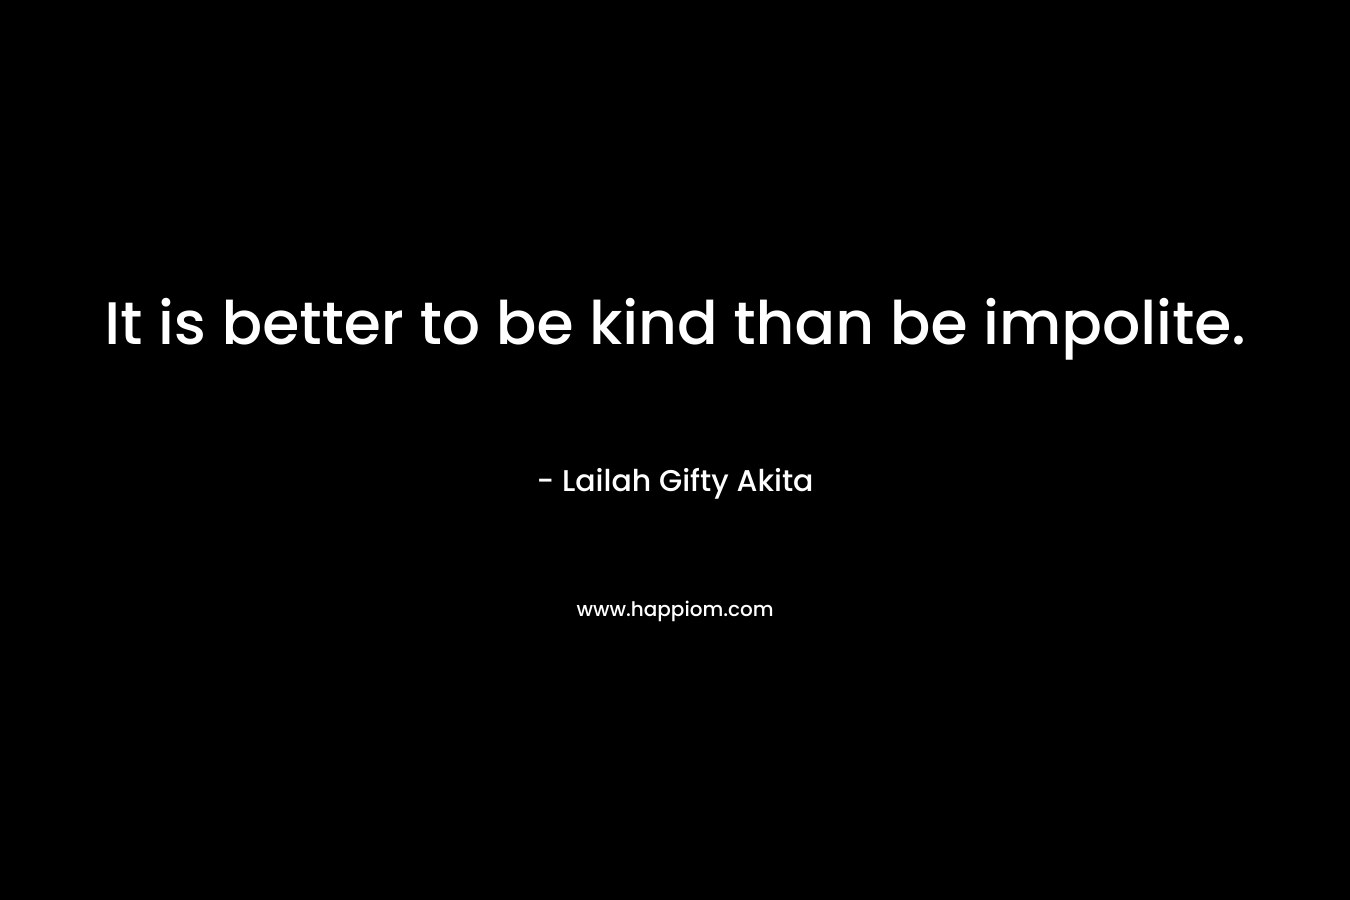 It is better to be kind than be impolite. – Lailah Gifty Akita